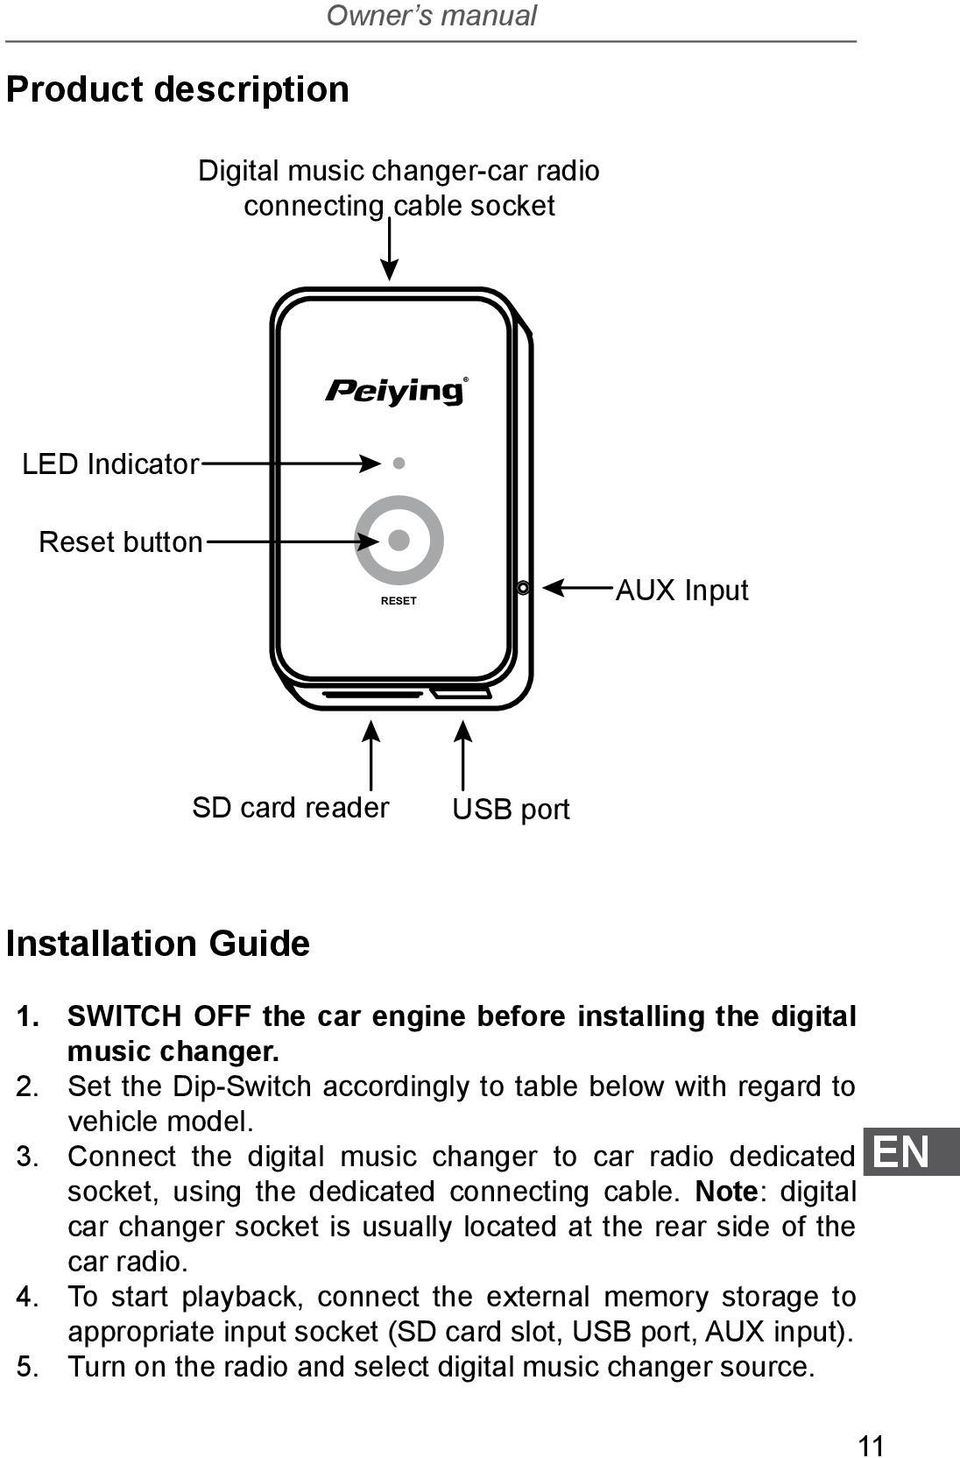 Connect the digital music changer to car radio dedicated socket, using the dedicated connecting cable.